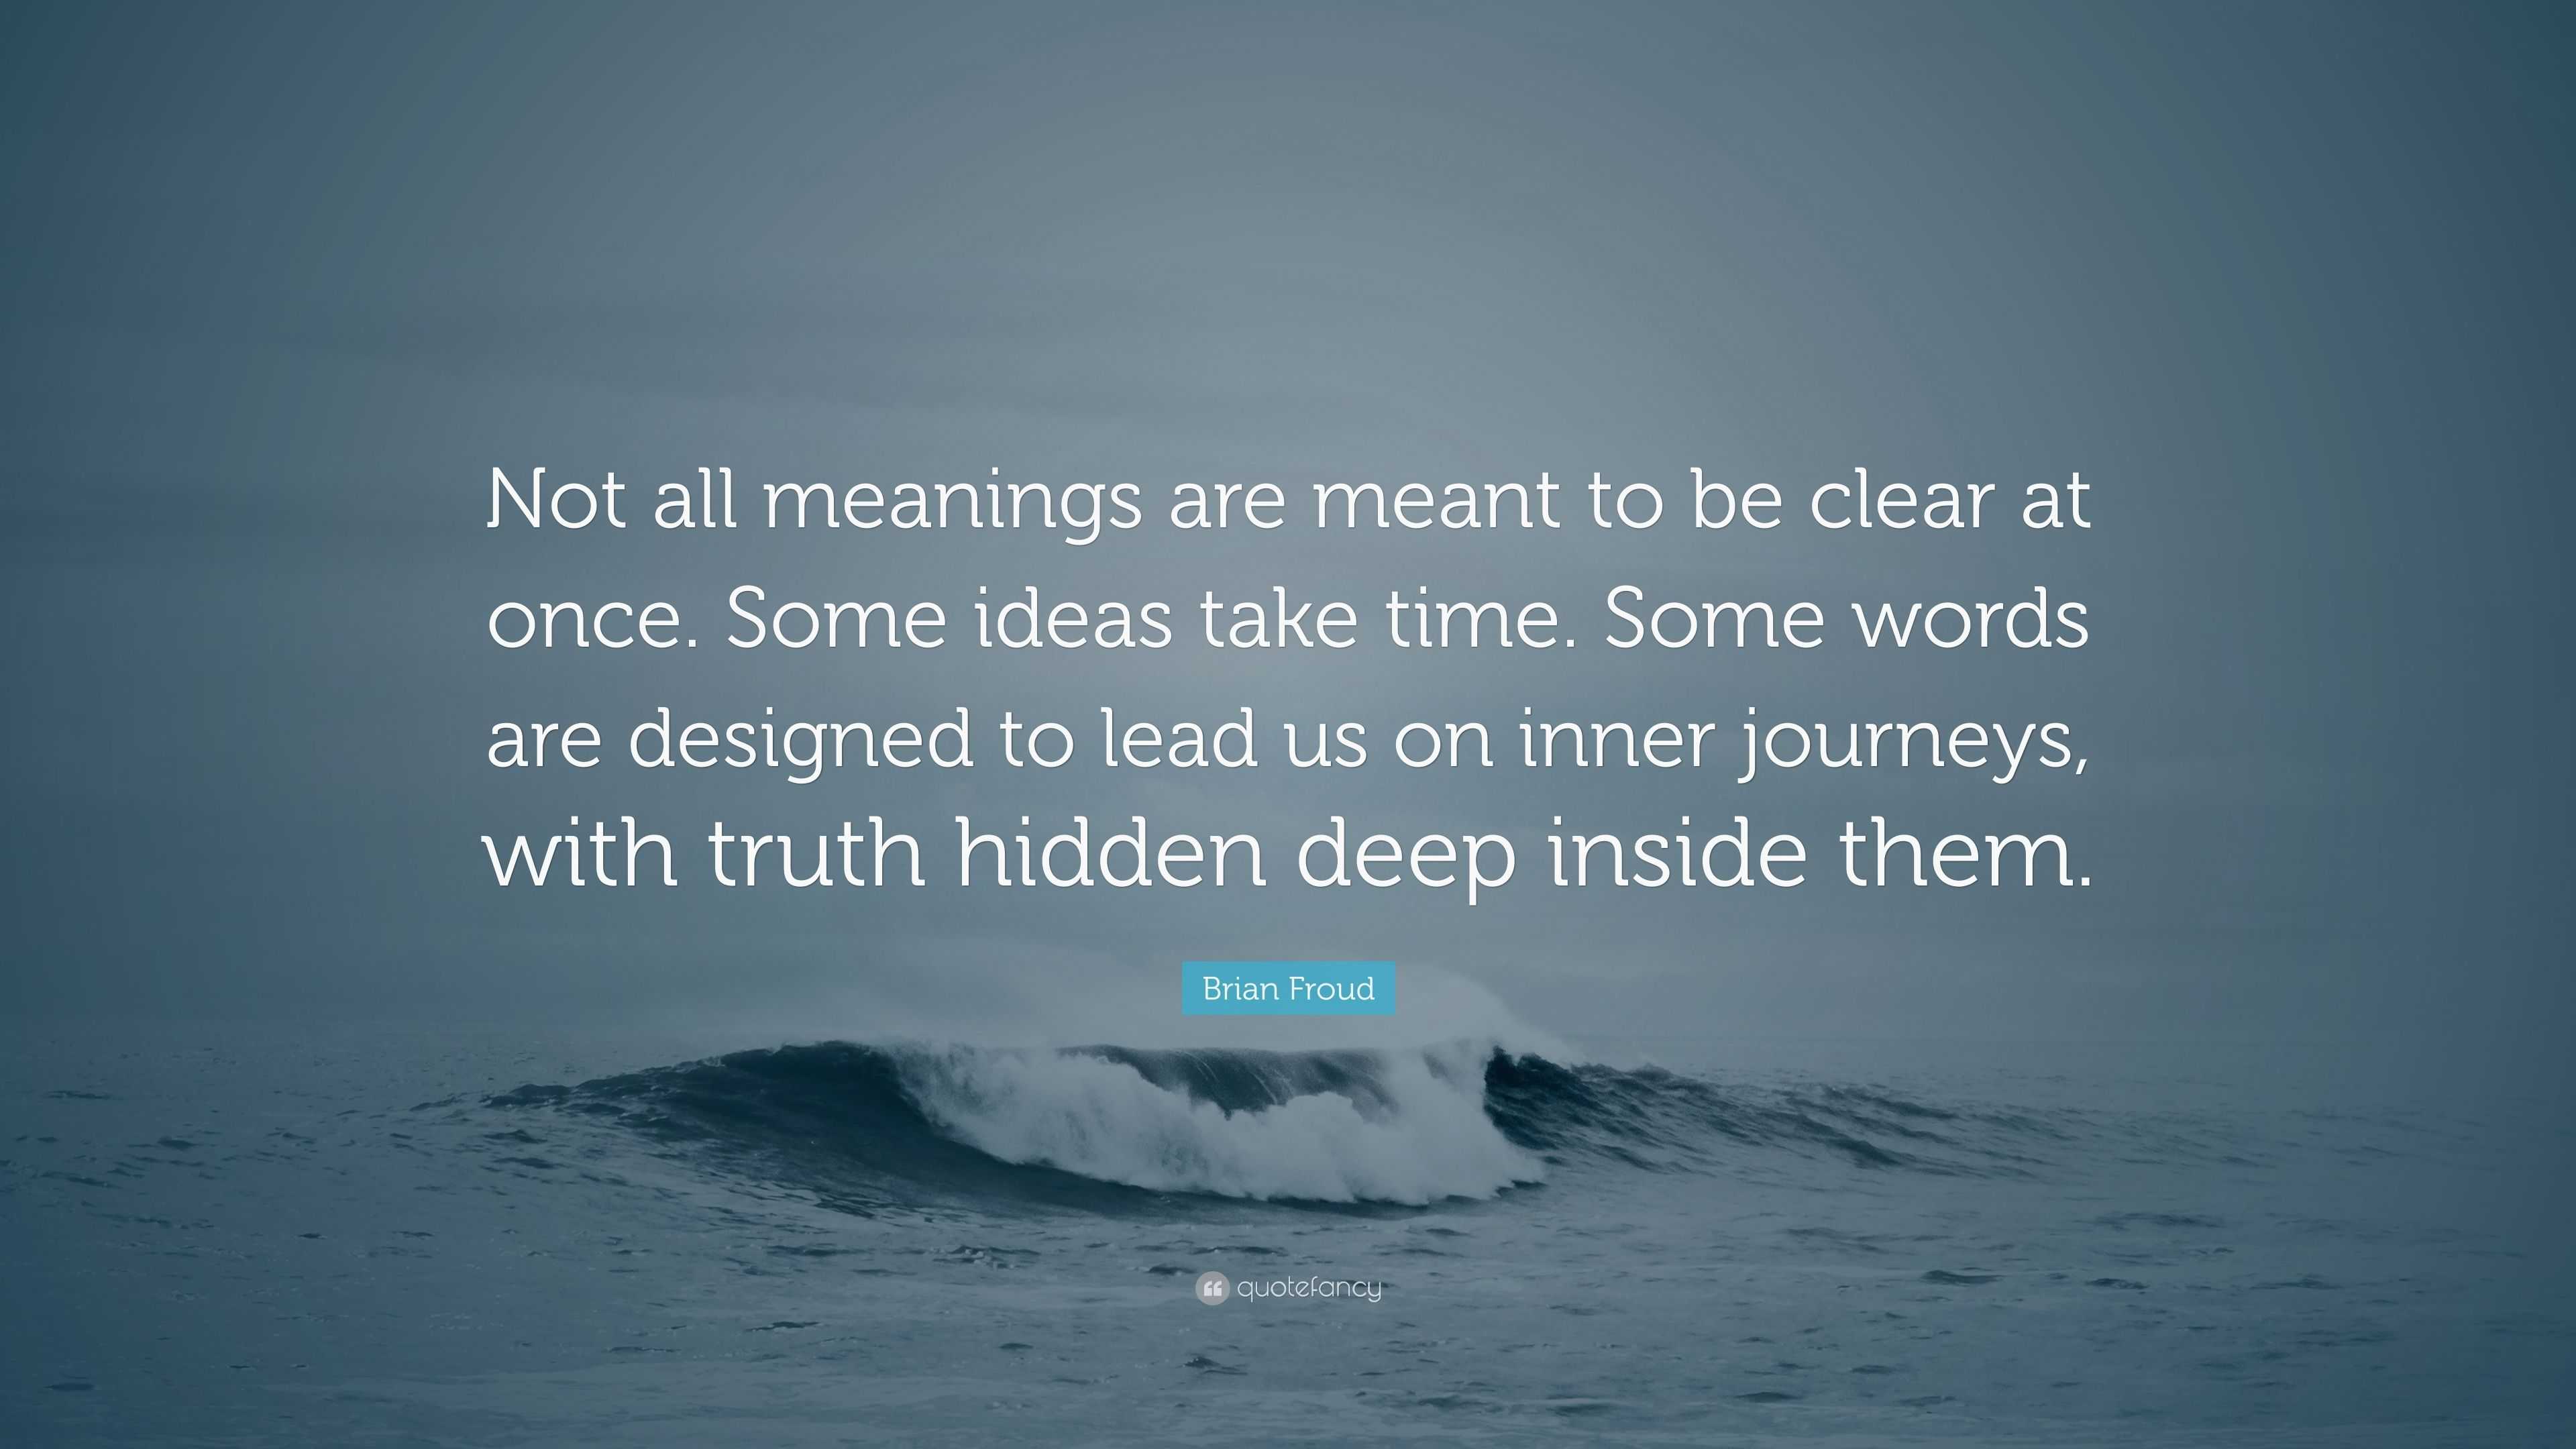 Brian Froud Quote: “Not all meanings are meant to be clear at once ...